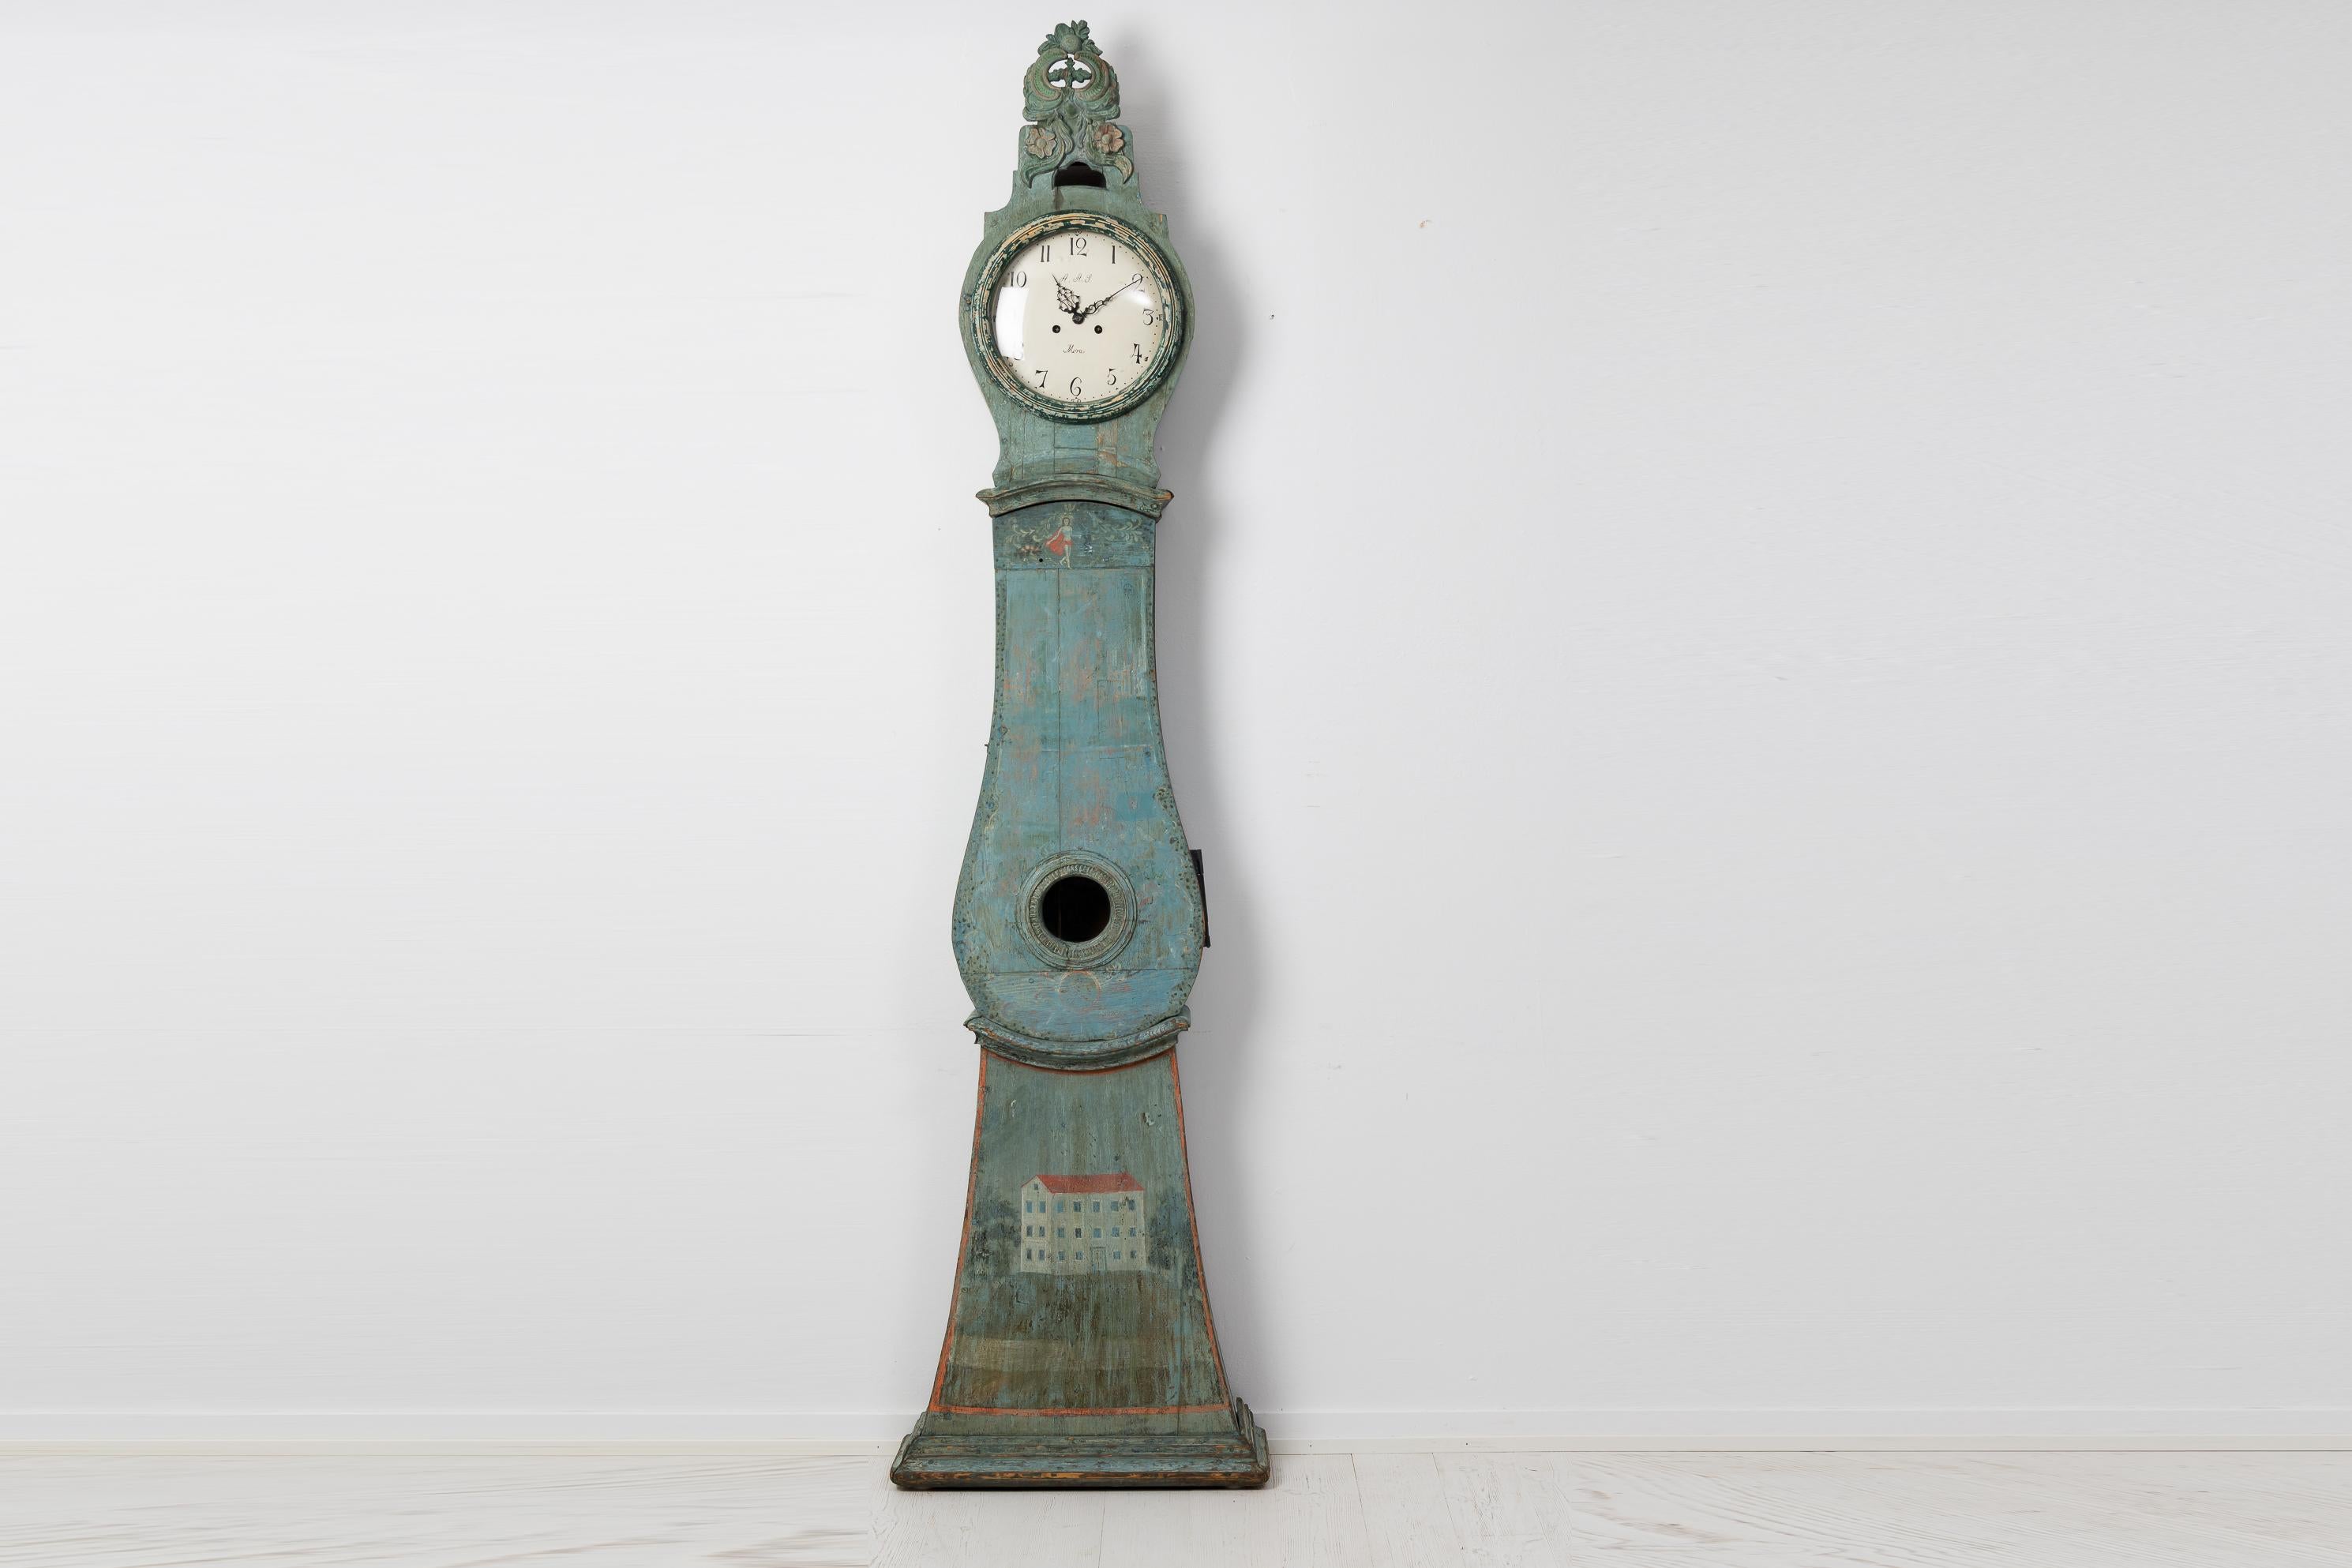 Long case clock from northern Sweden made during the late 1700s. The clock has the original blue-green paint with unusual decor. Time has also created a unique patina that adds to the clock’s character. Additionally the clock also has a detailed